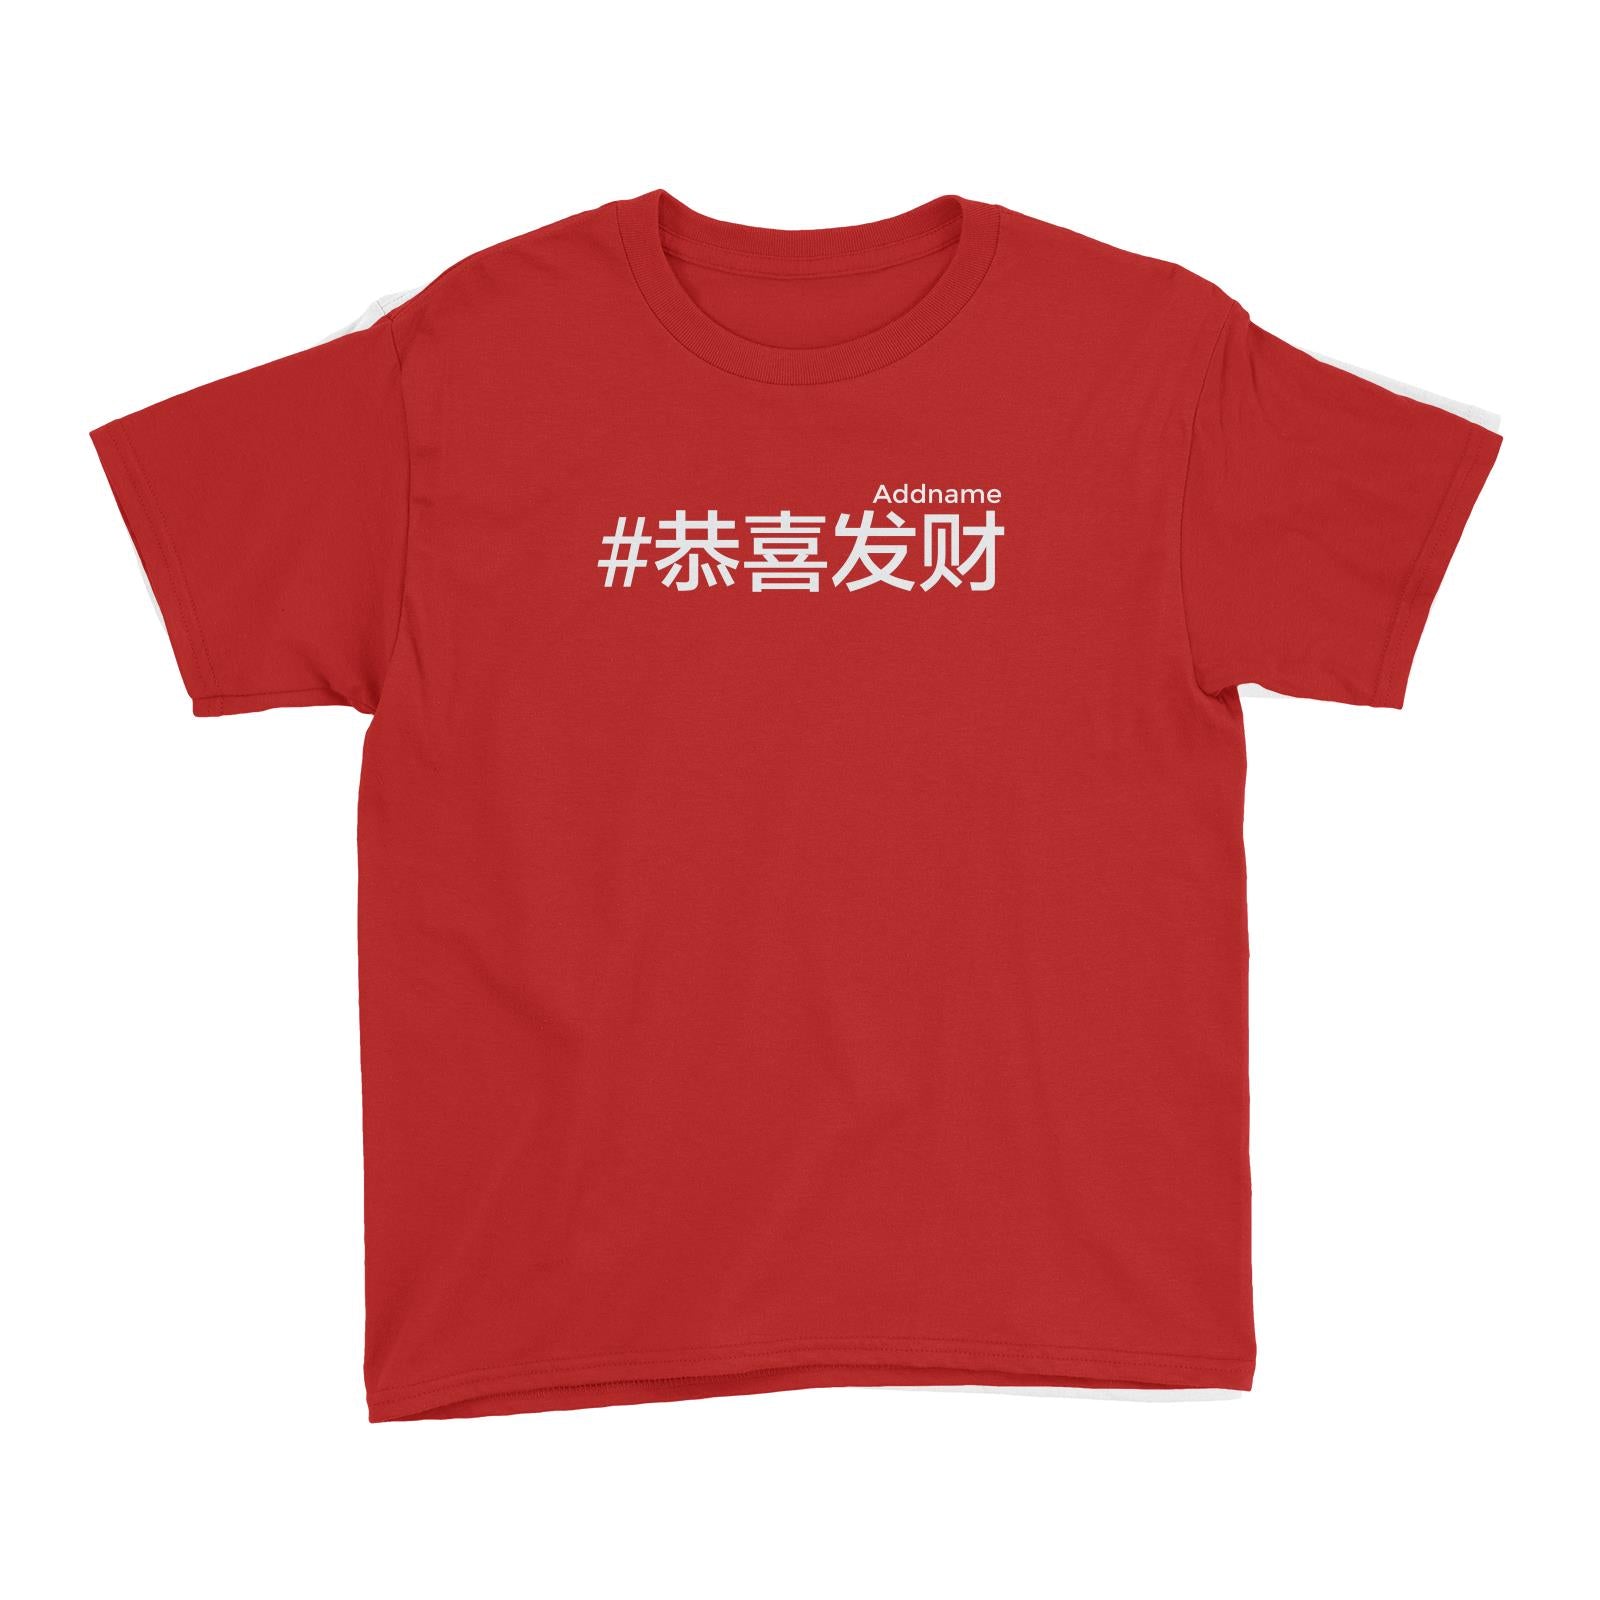 Chinese New Year Hashtag Gong Xi Fa Cai Chinese Kid's T-Shirt  Personalizable Designs